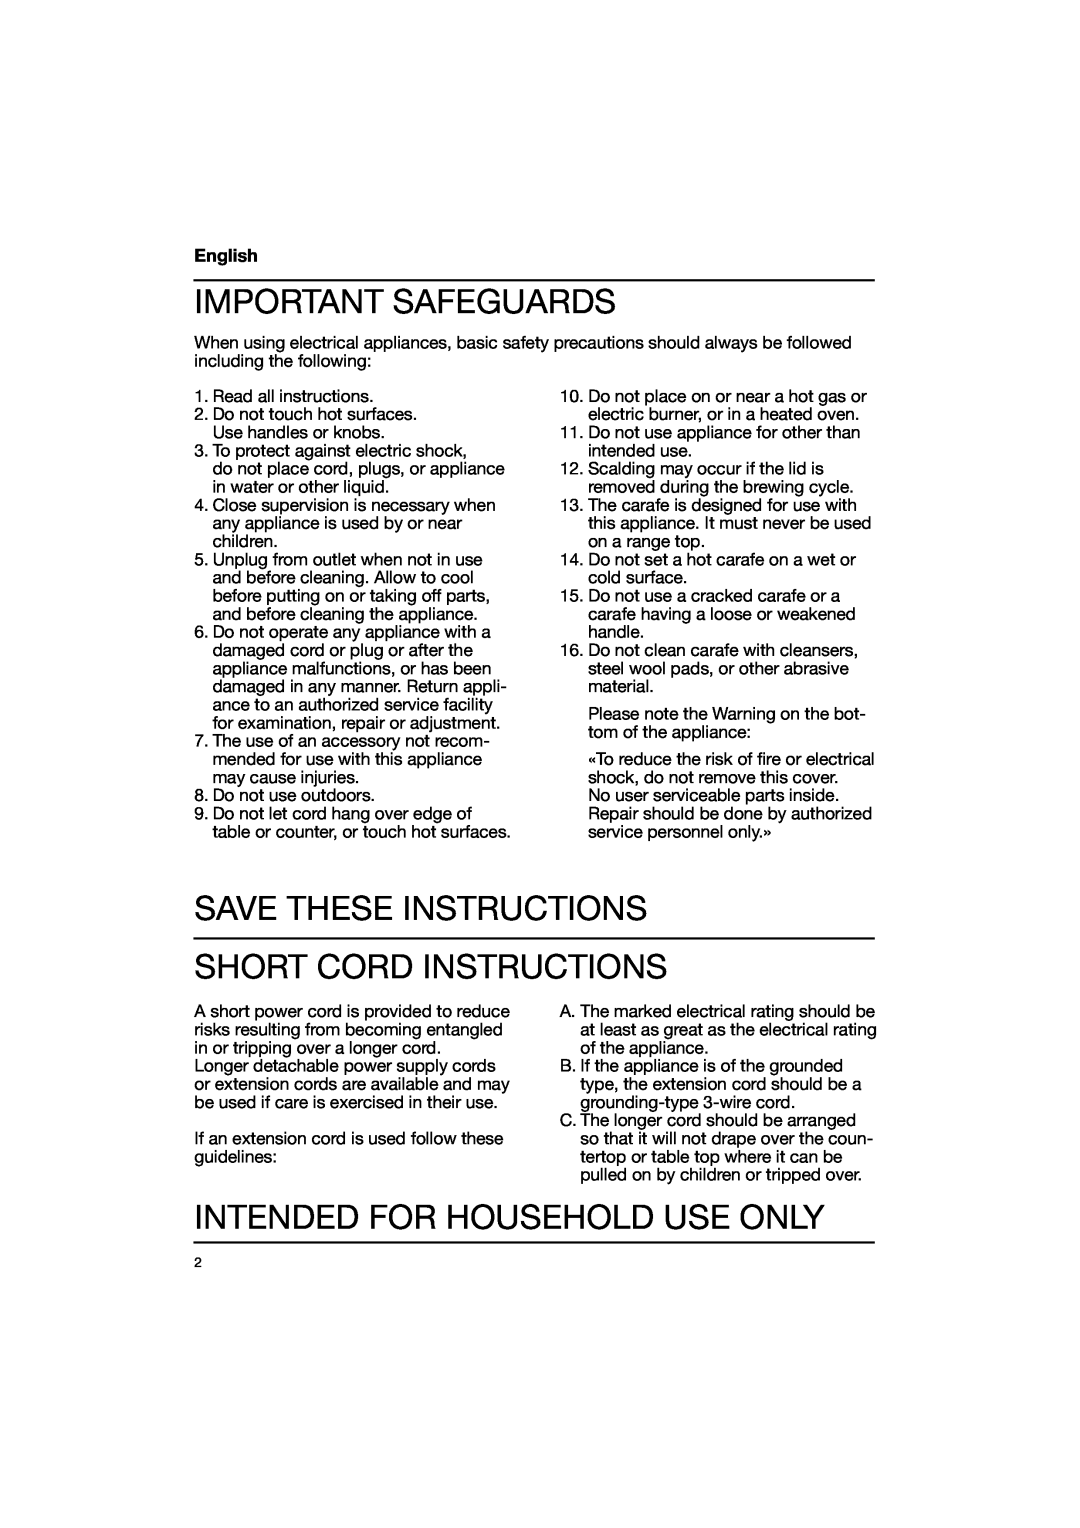 Braun 3114 Important Safeguards, Save These Instructions Short Cord Instructions, Intended For Household Use Only, English 